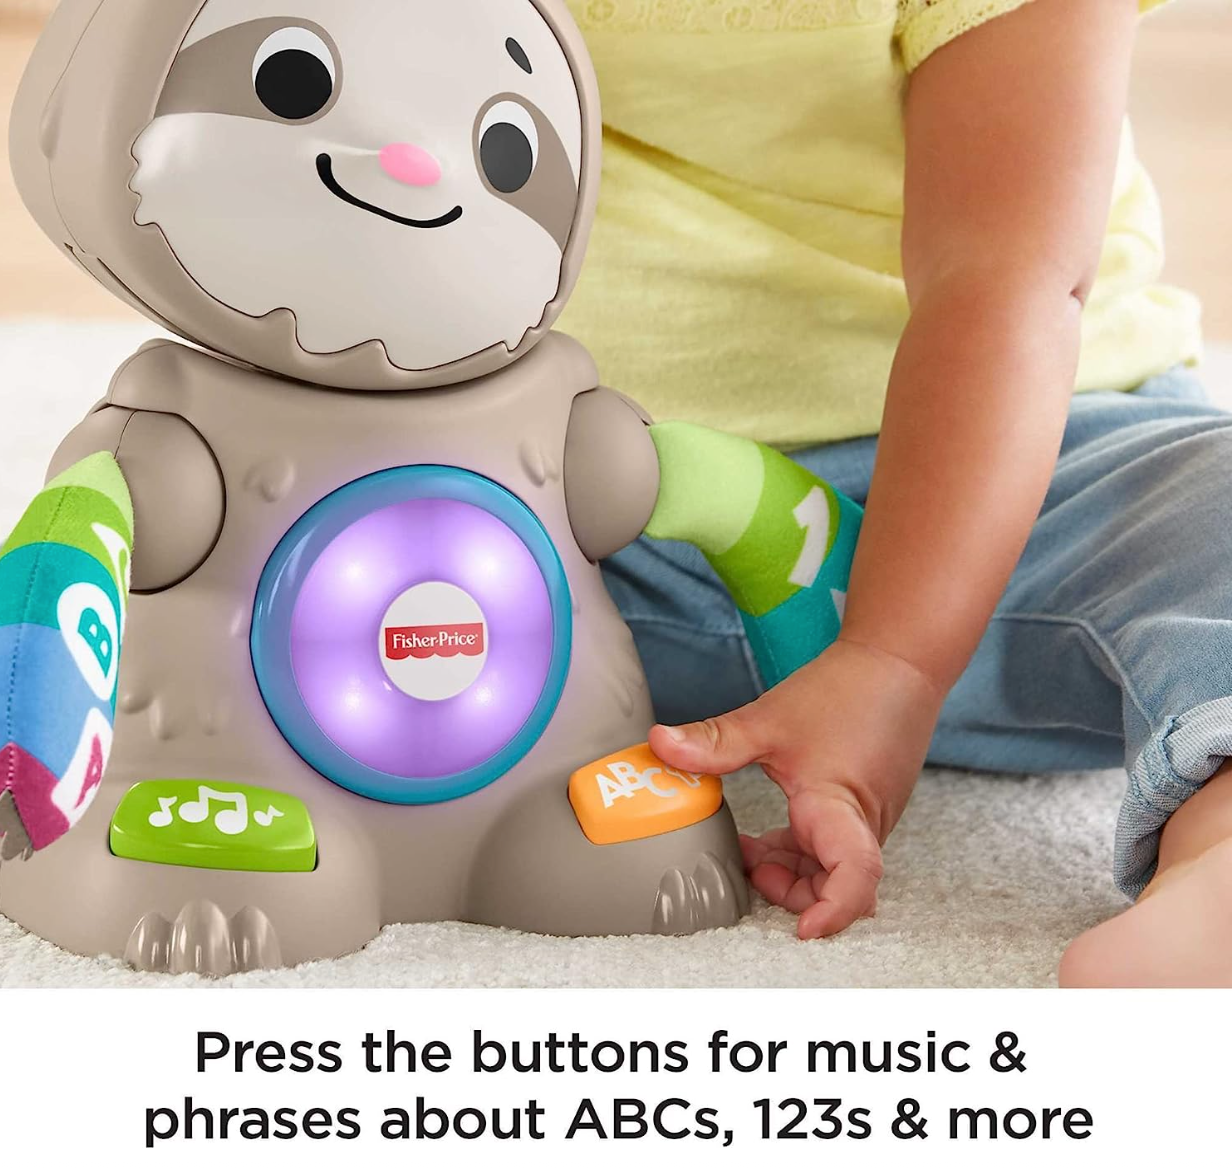 Fisher-Price Linkimals Learning Toy Smooth Moves Sloth With Interactive Music And Lights For Infants And Toddlers